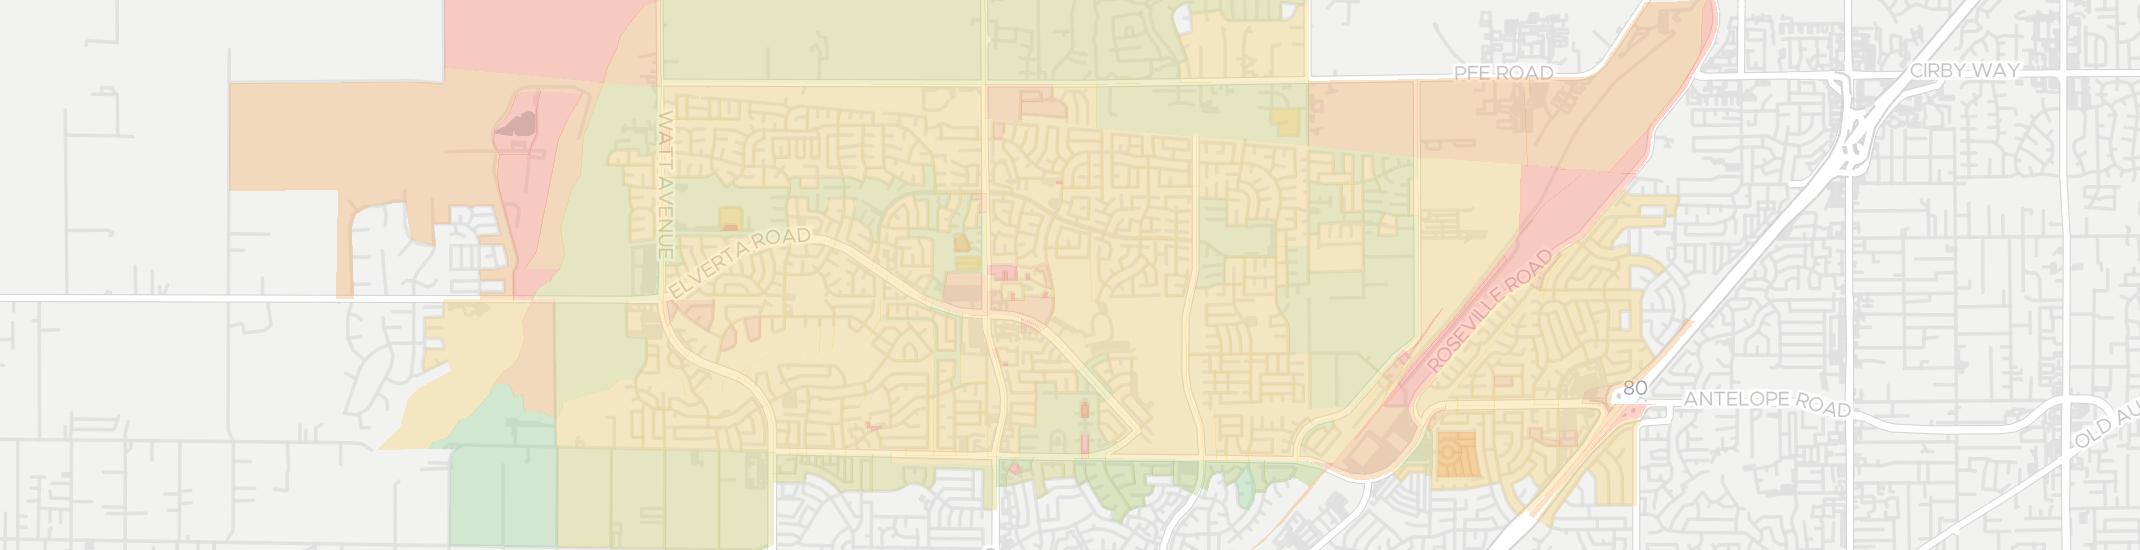 Antelope Internet Competition Map. Click for interactive map